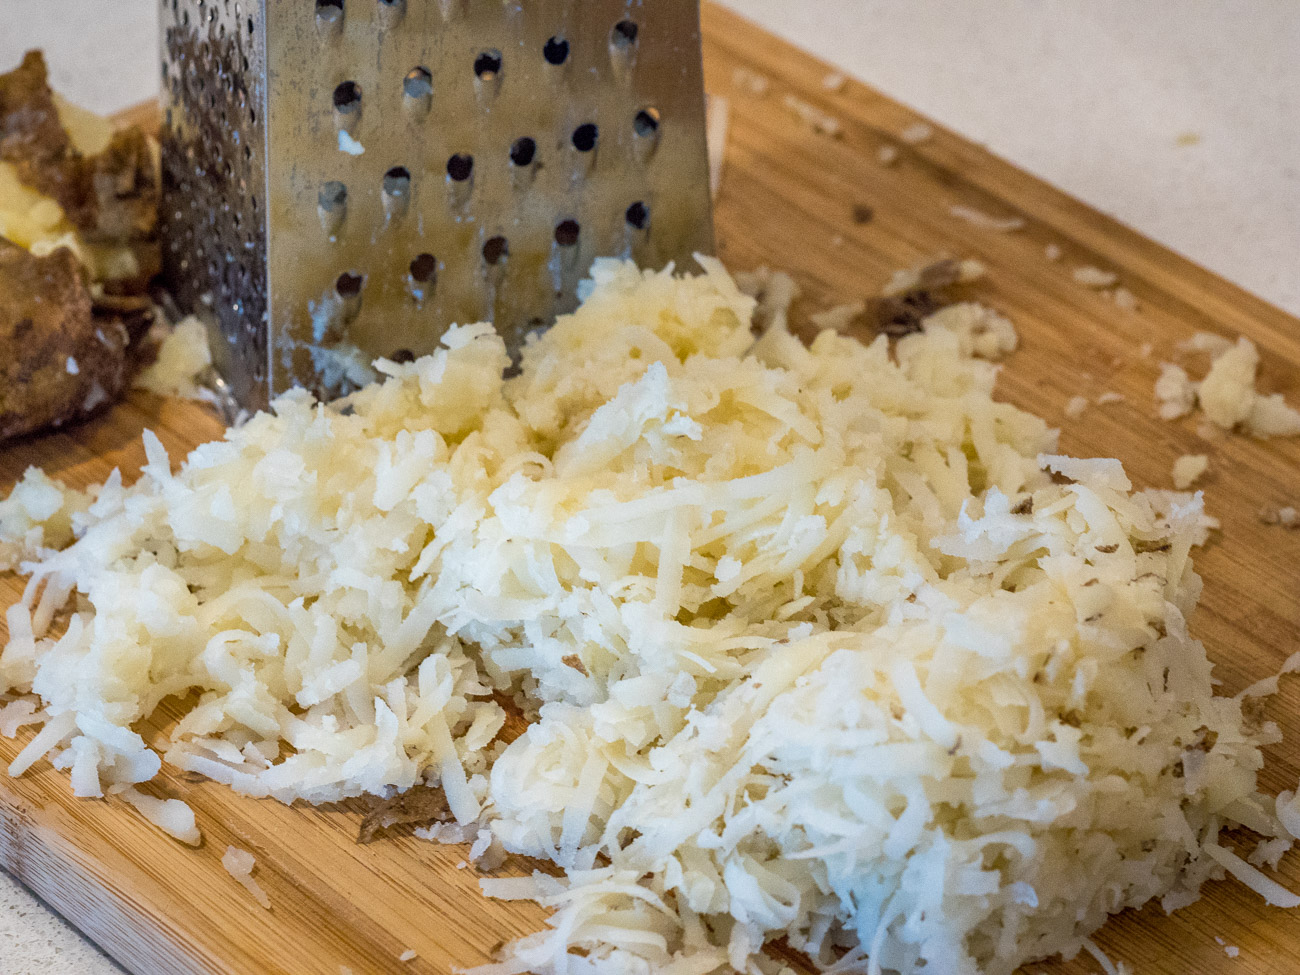 Preheat the oven to 350ºF. Grate potatoes using large holes on box grater. Do not peel potatoes before grating.